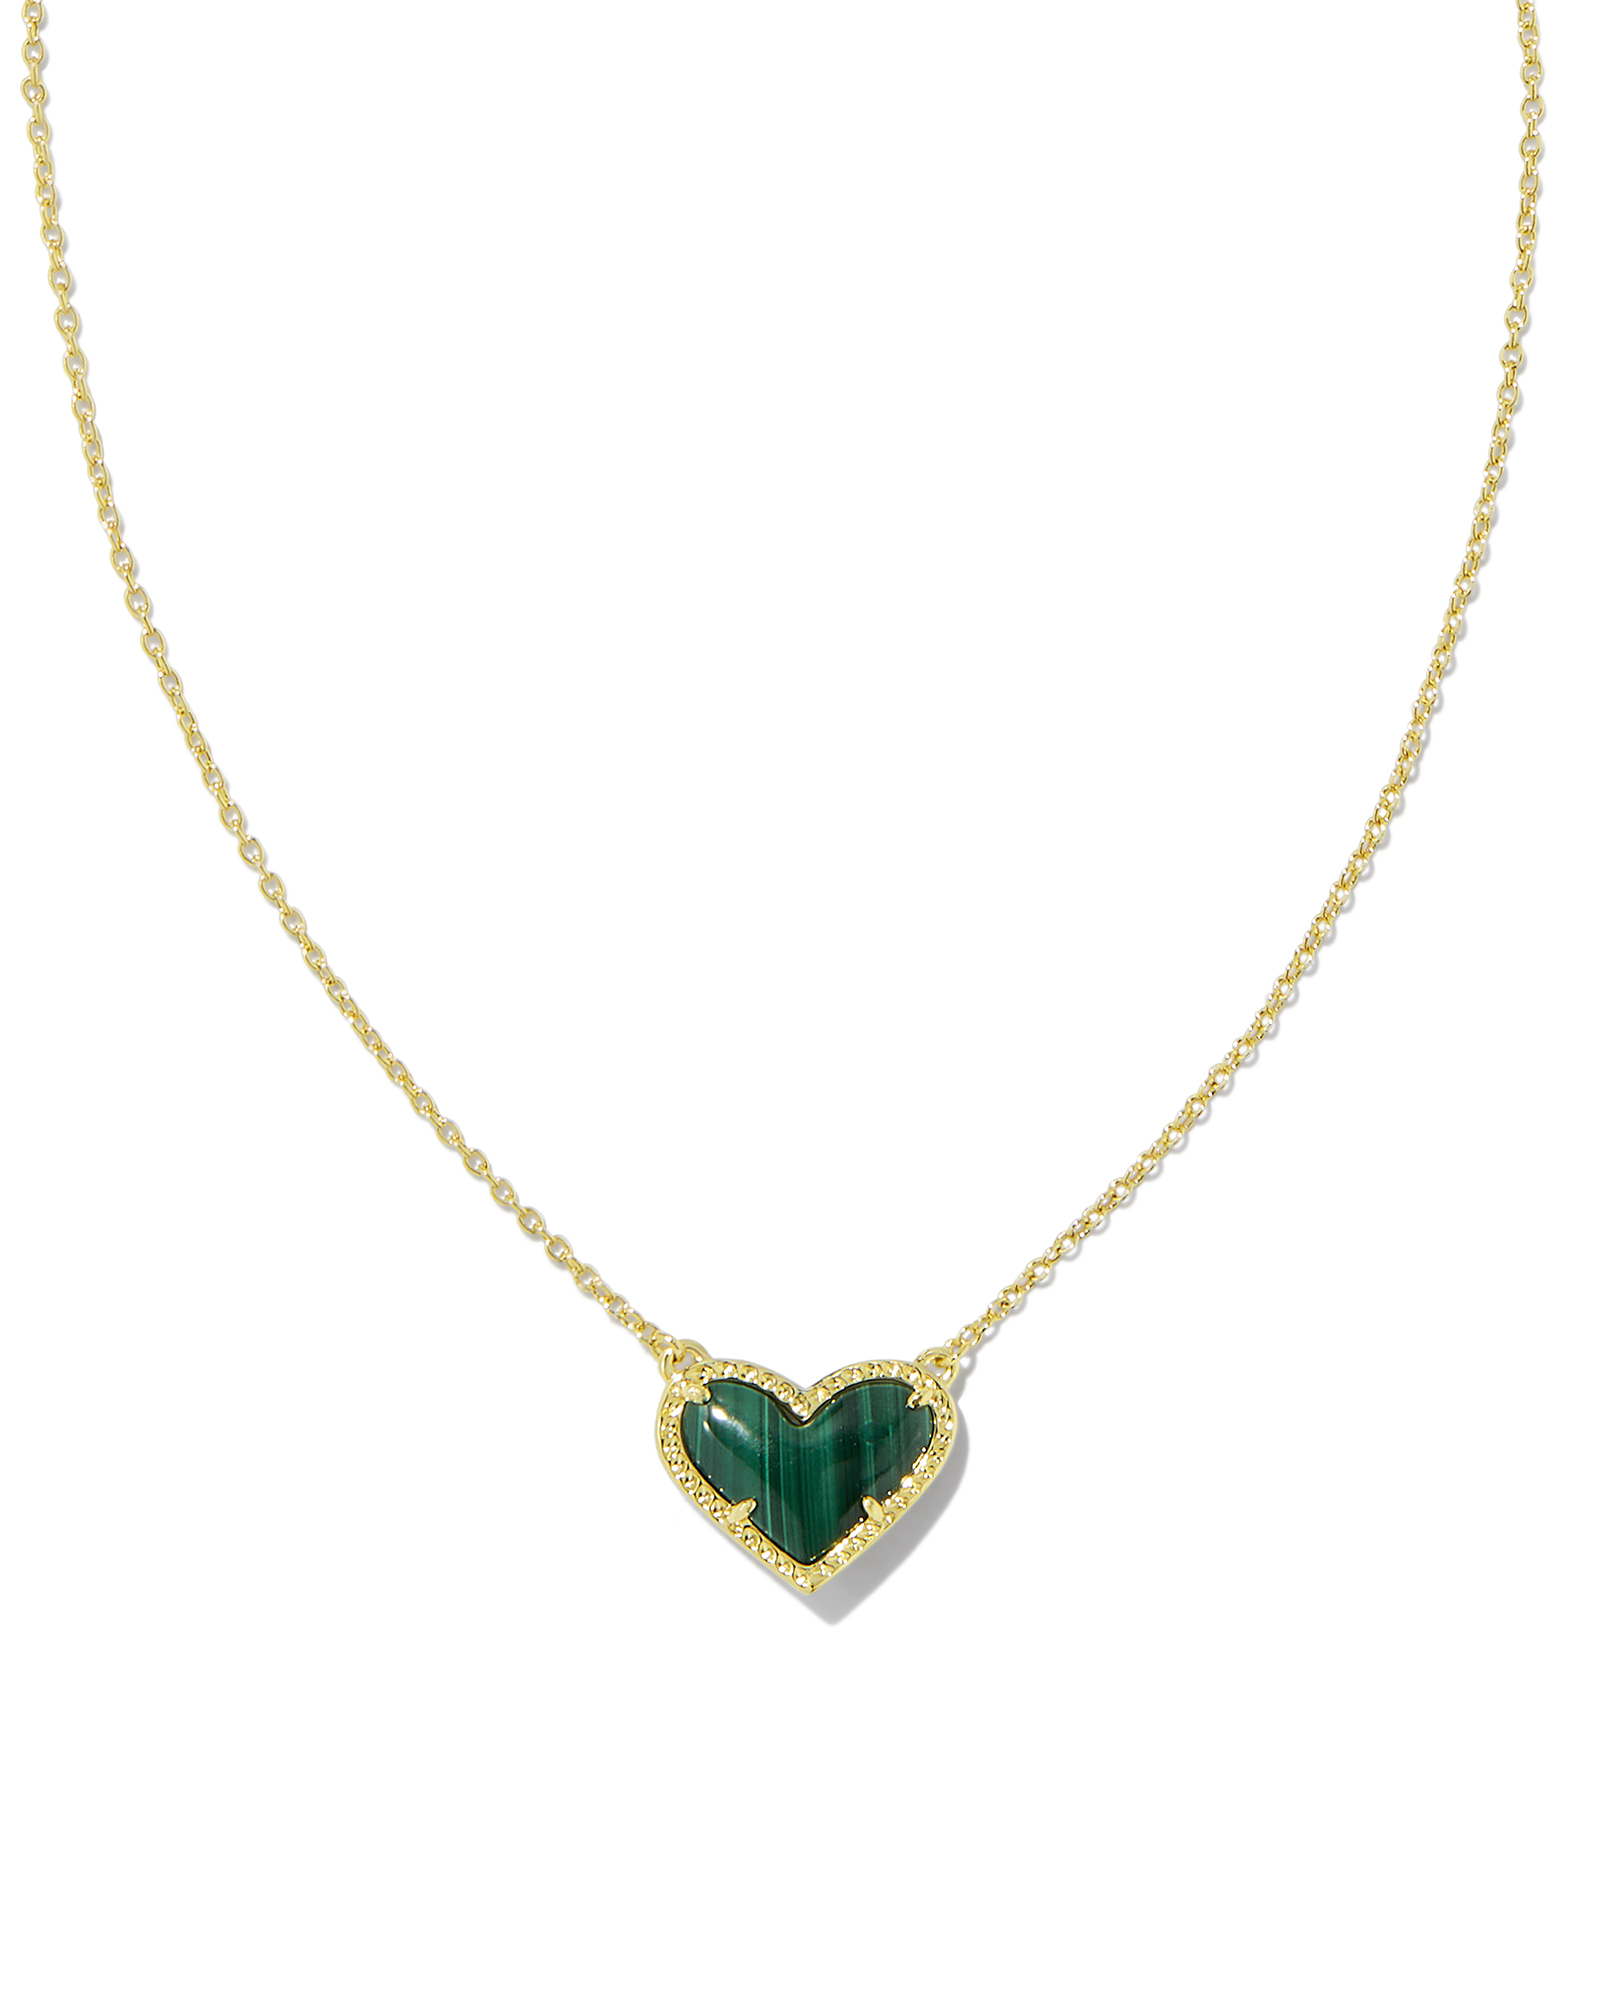 Buy DEPHINI - Green Heart Necklace - 925 Silver Heart Pendant Embellished  with Branded Crystal 18